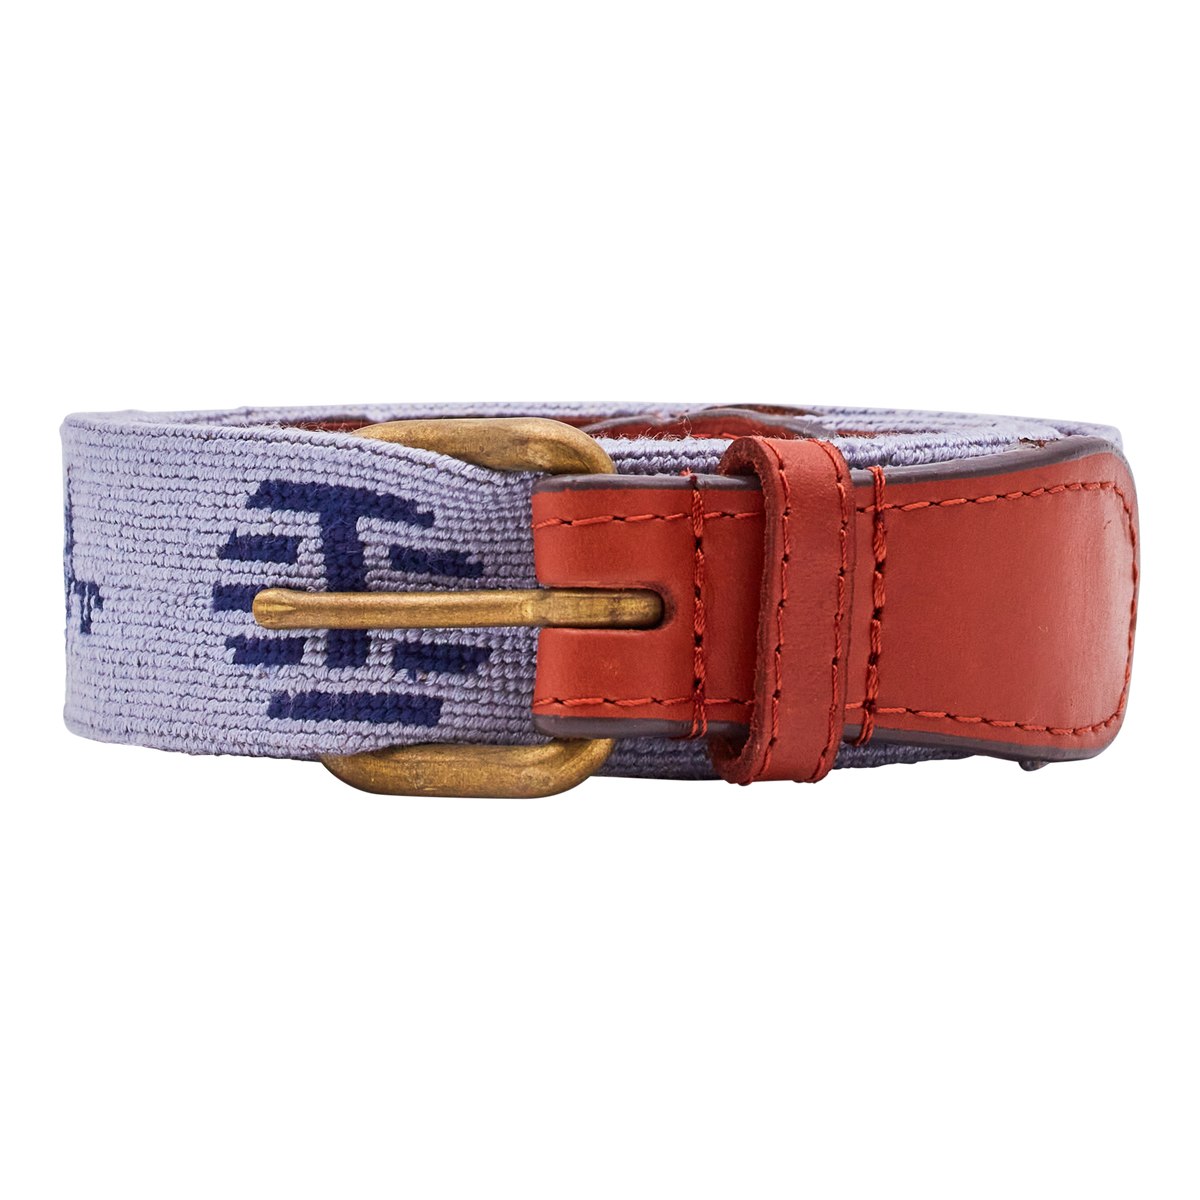 Made in St. Louis: Needlepoint belts looking to shake their preppy past